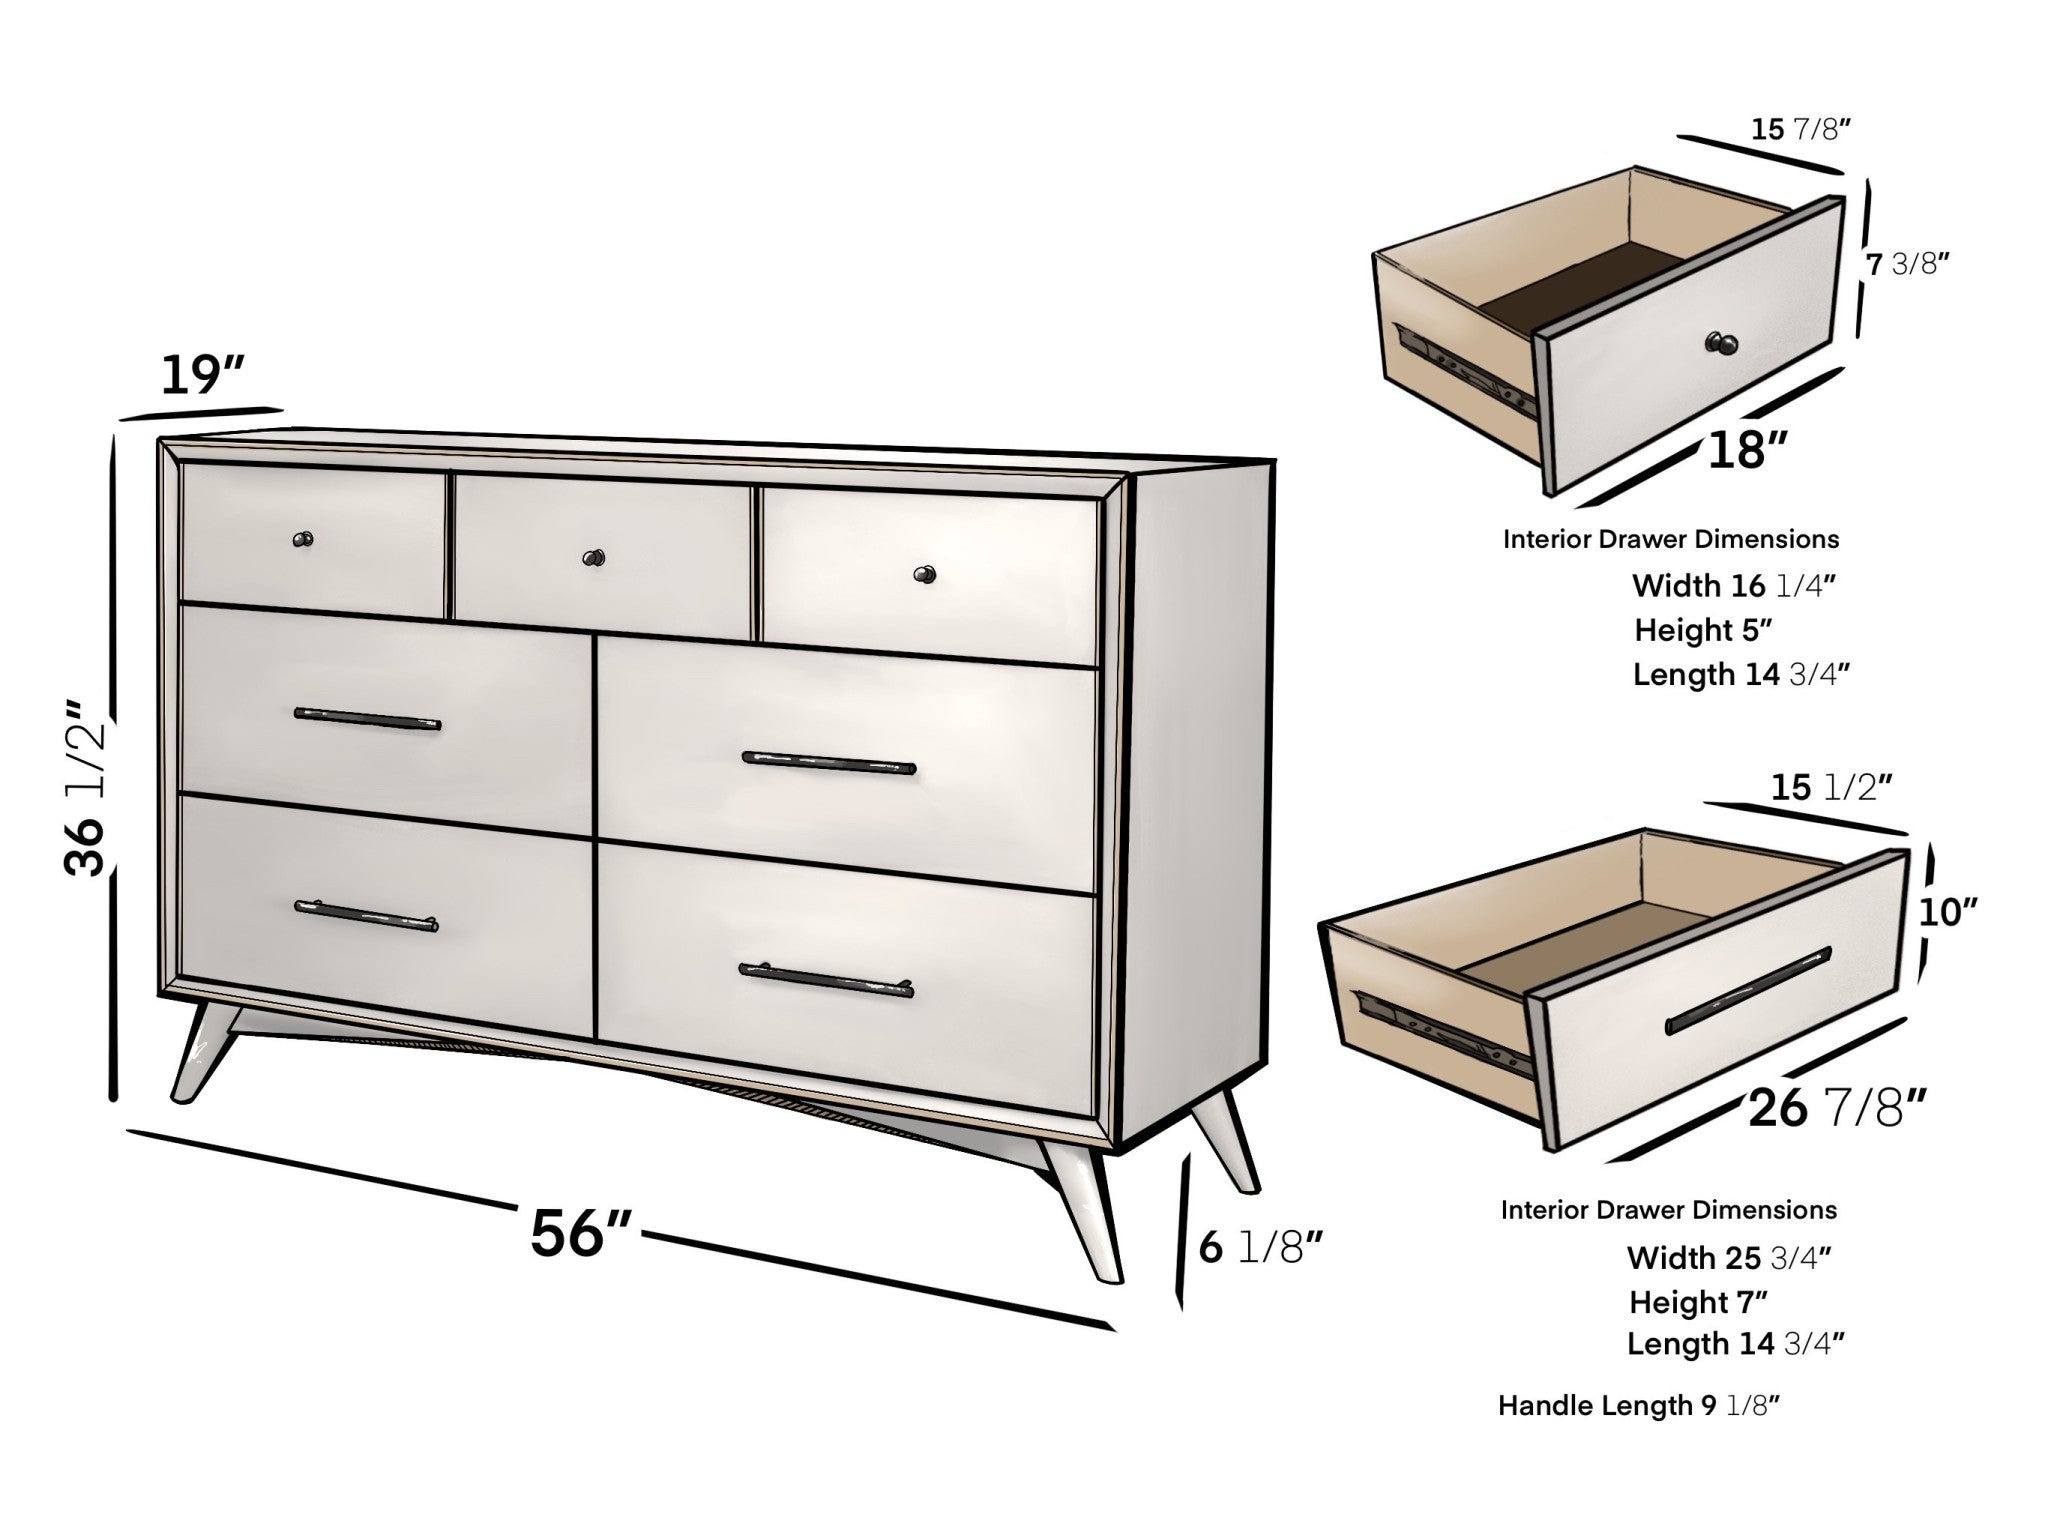 56" White Solid Wood Seven Drawer Double Dresser